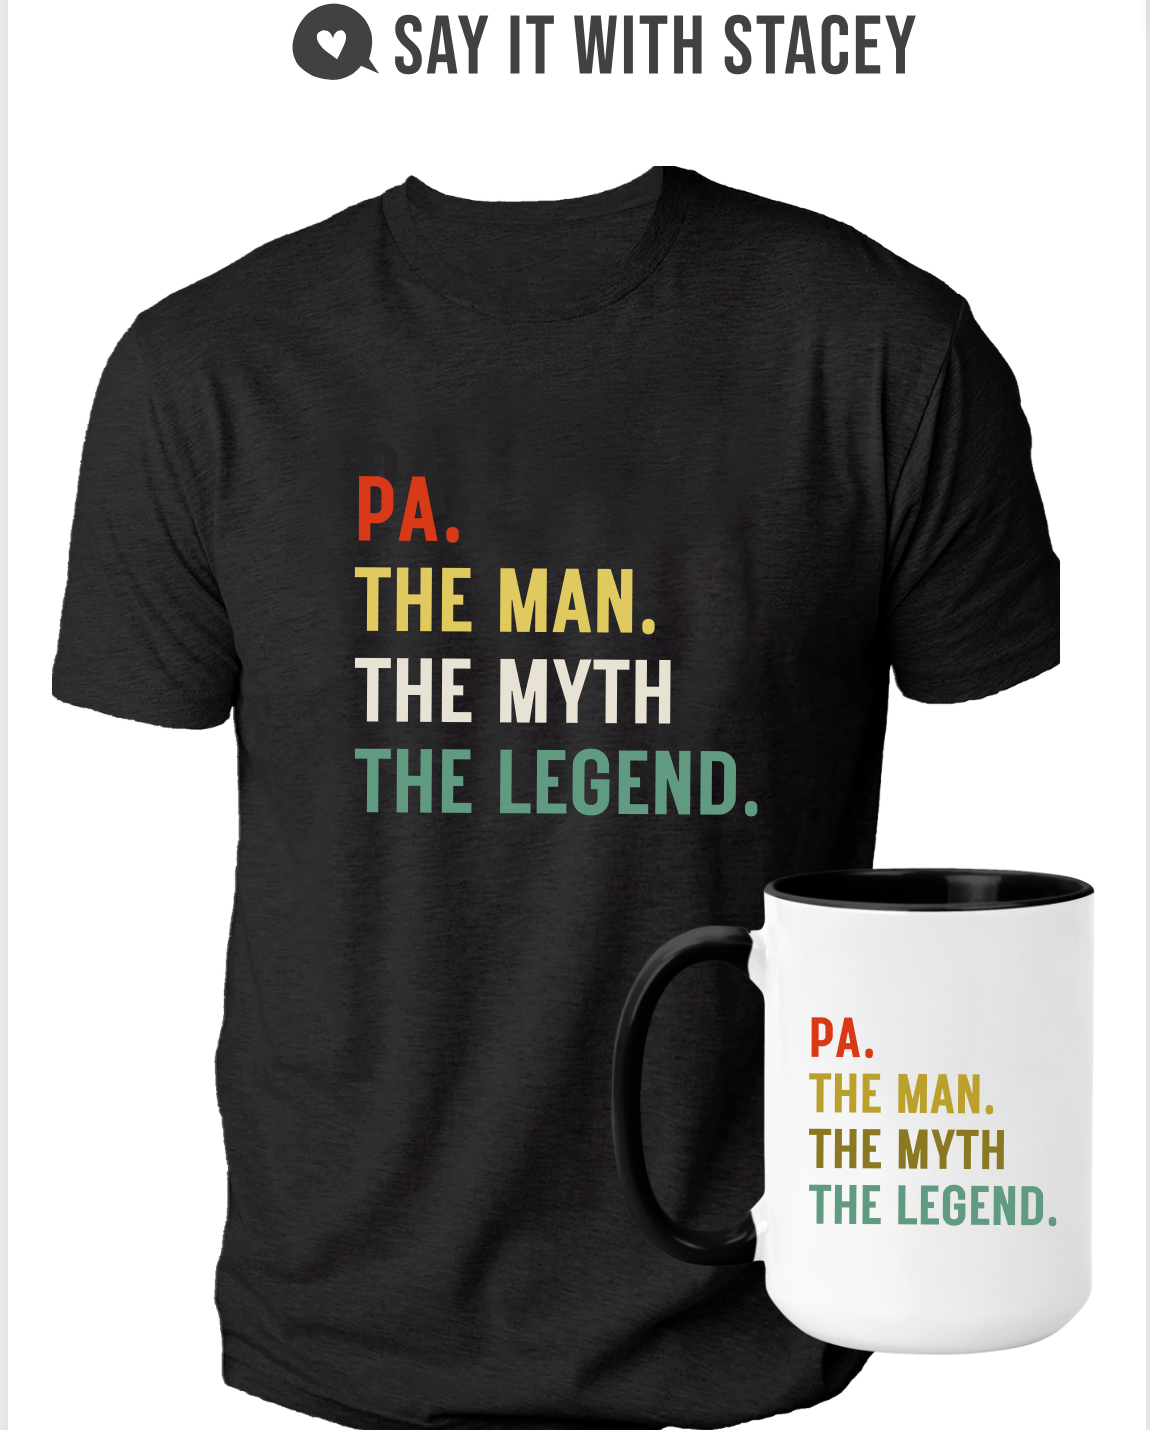 PA, The Man, The Myth, The Legend - deluxe cotton blend tee